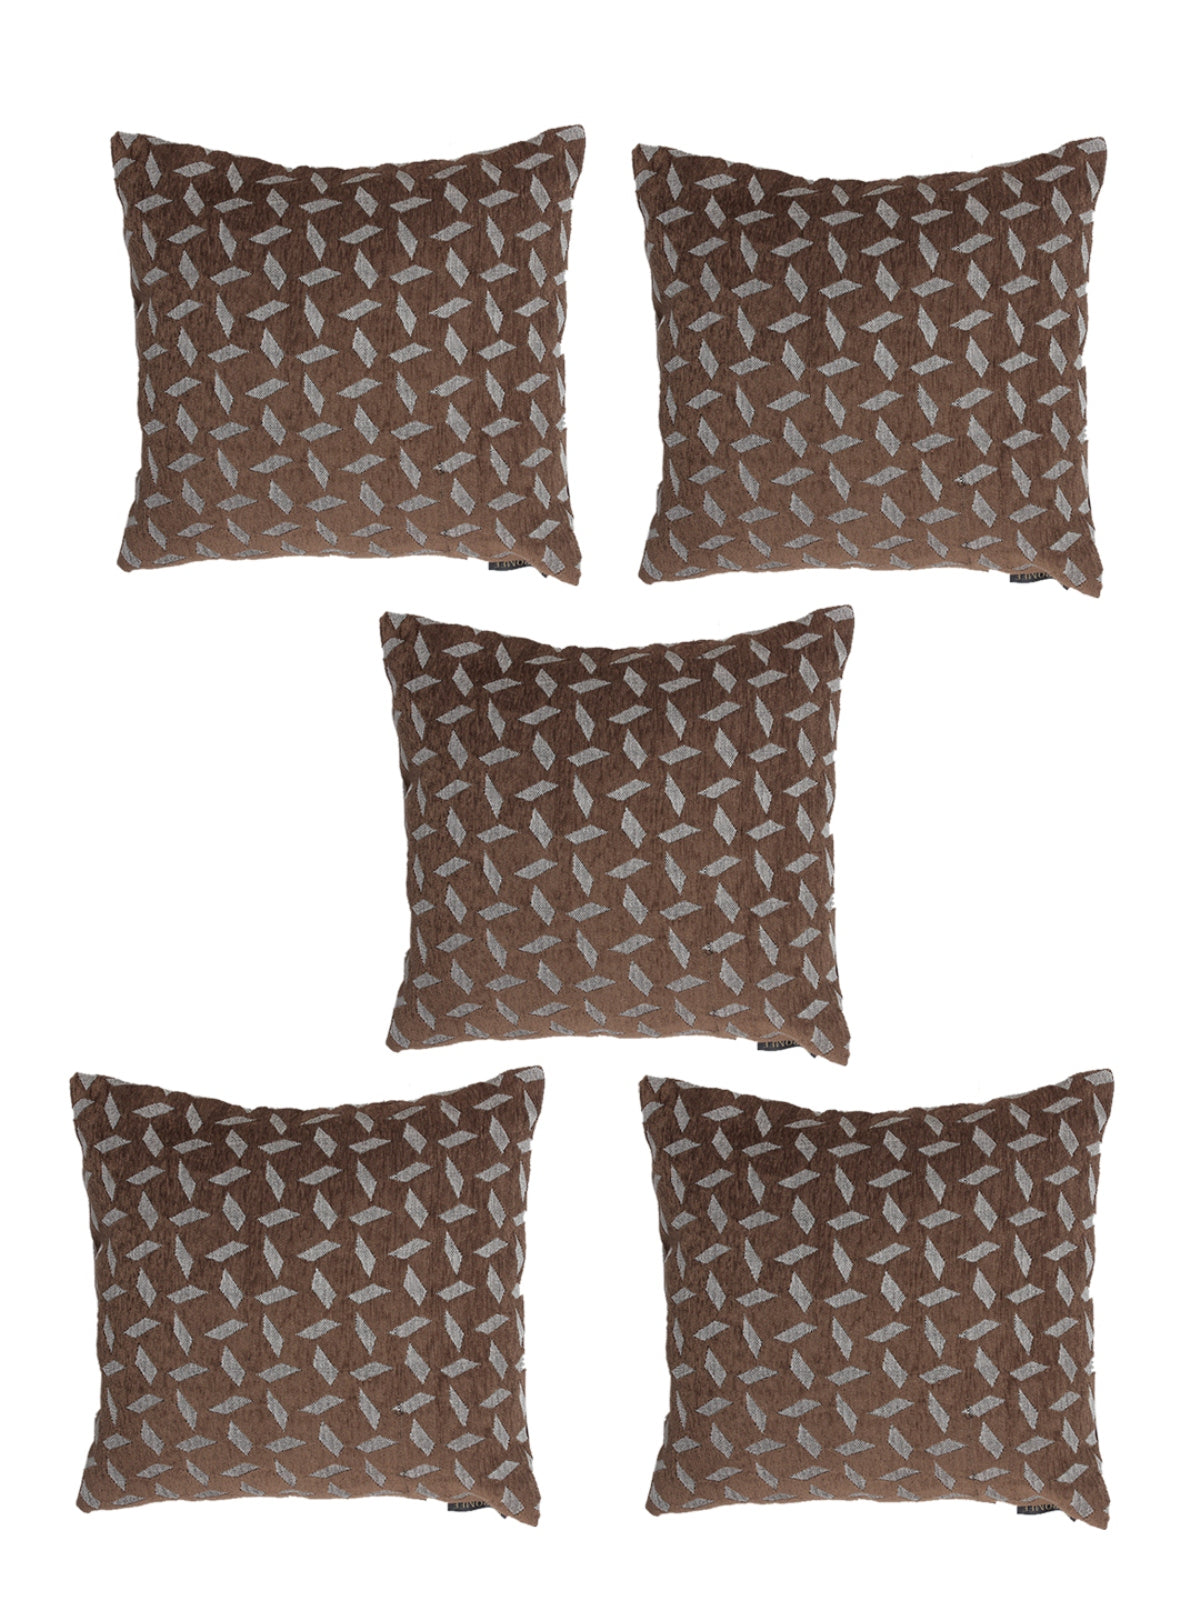 Soft Chenille Designer Ethnic Abstract Cushion Covers 16x16 inch, Set of 5 - Brown